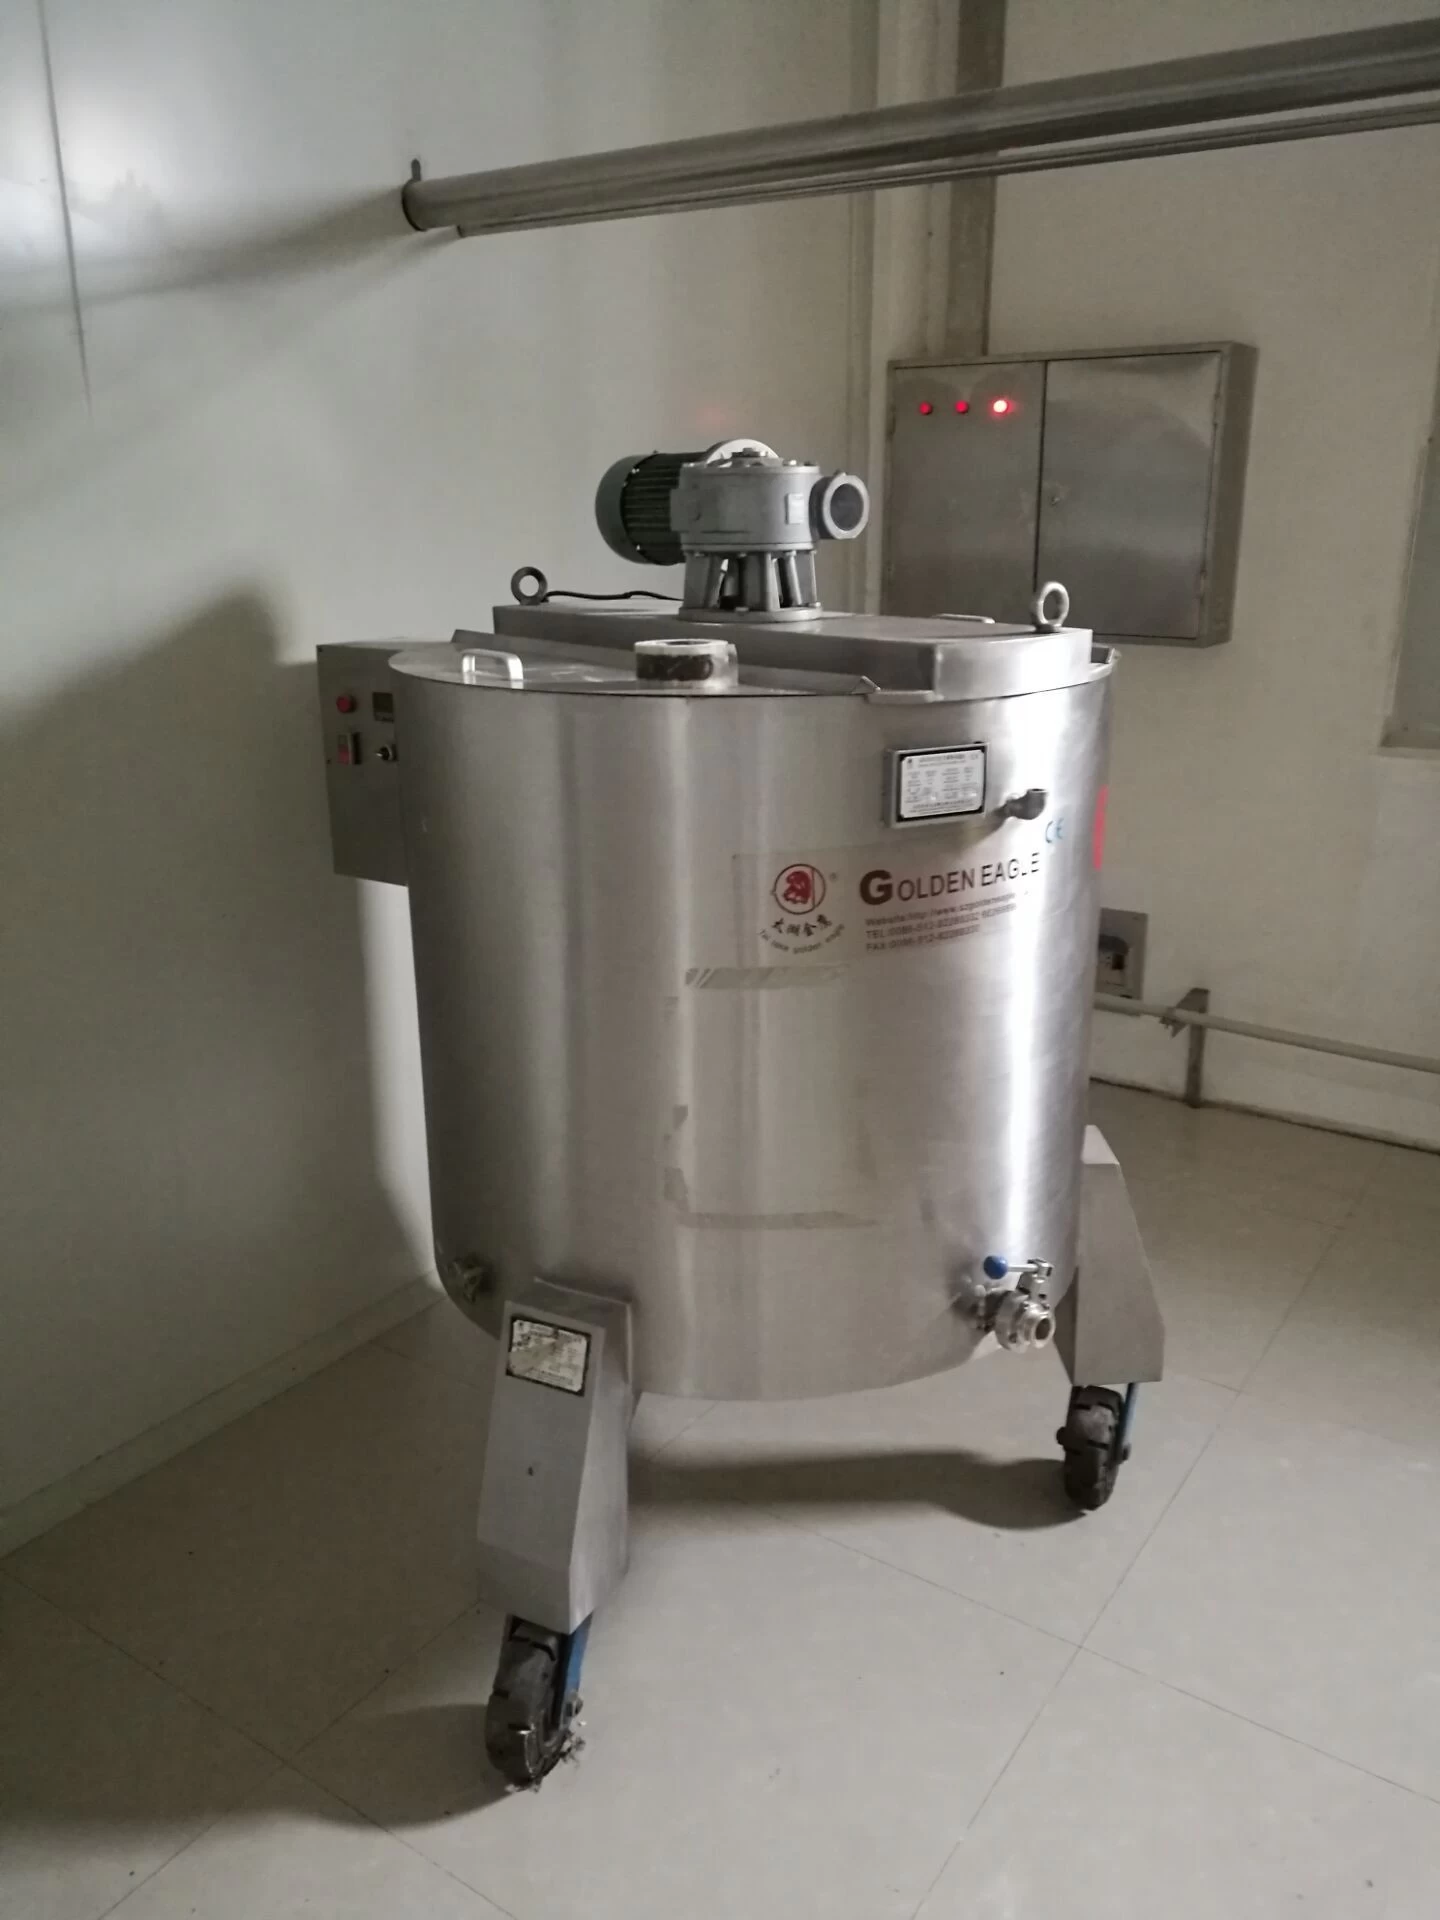 China high quality chocolate syrup holding tank, stainless steel chocolate syrup holding tank manufacturer